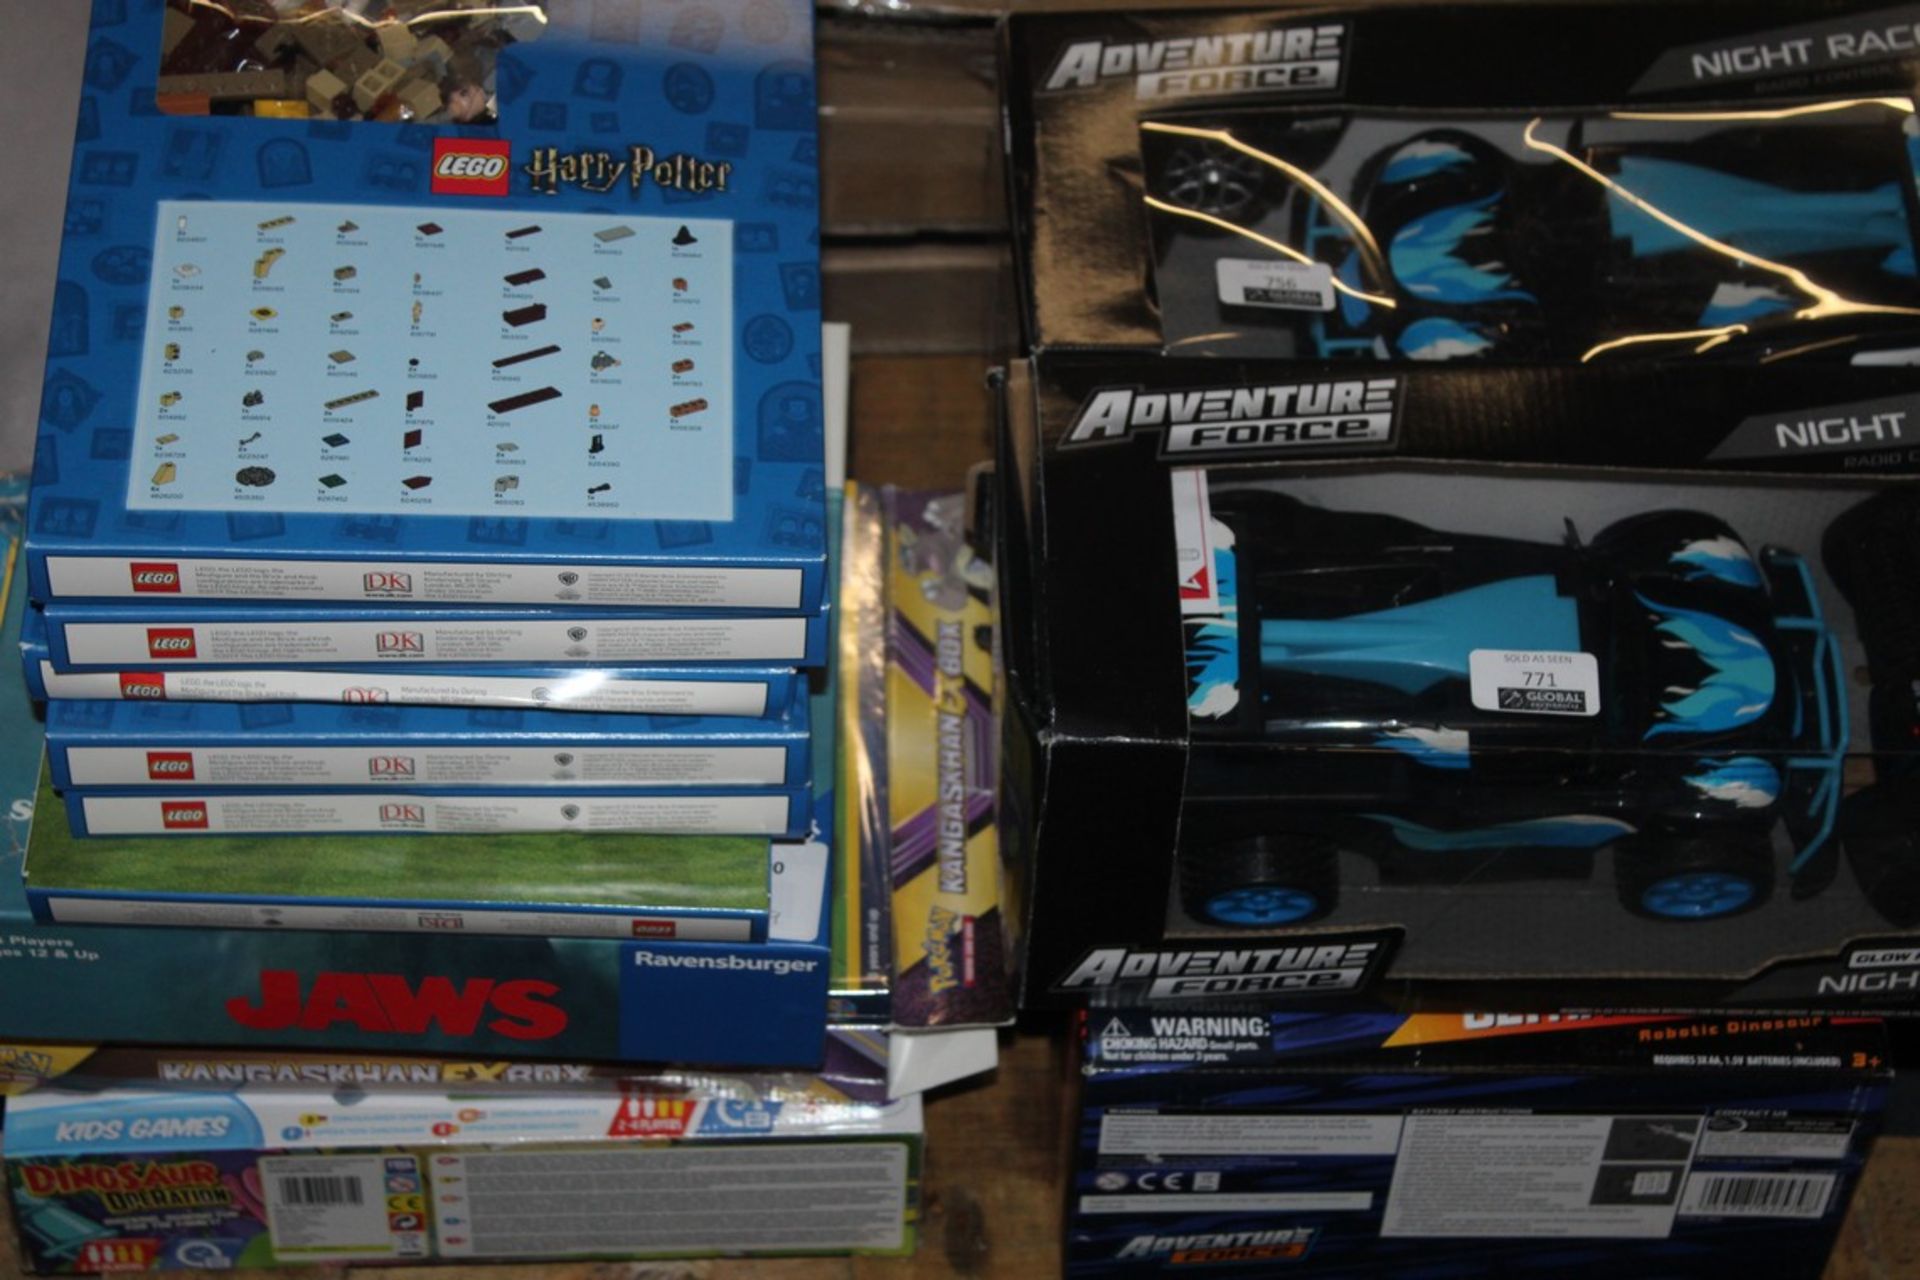 Assorted Toy Items to Include, Adventure Force, Night Racers, Toy Story 4, Sporkies and Lego